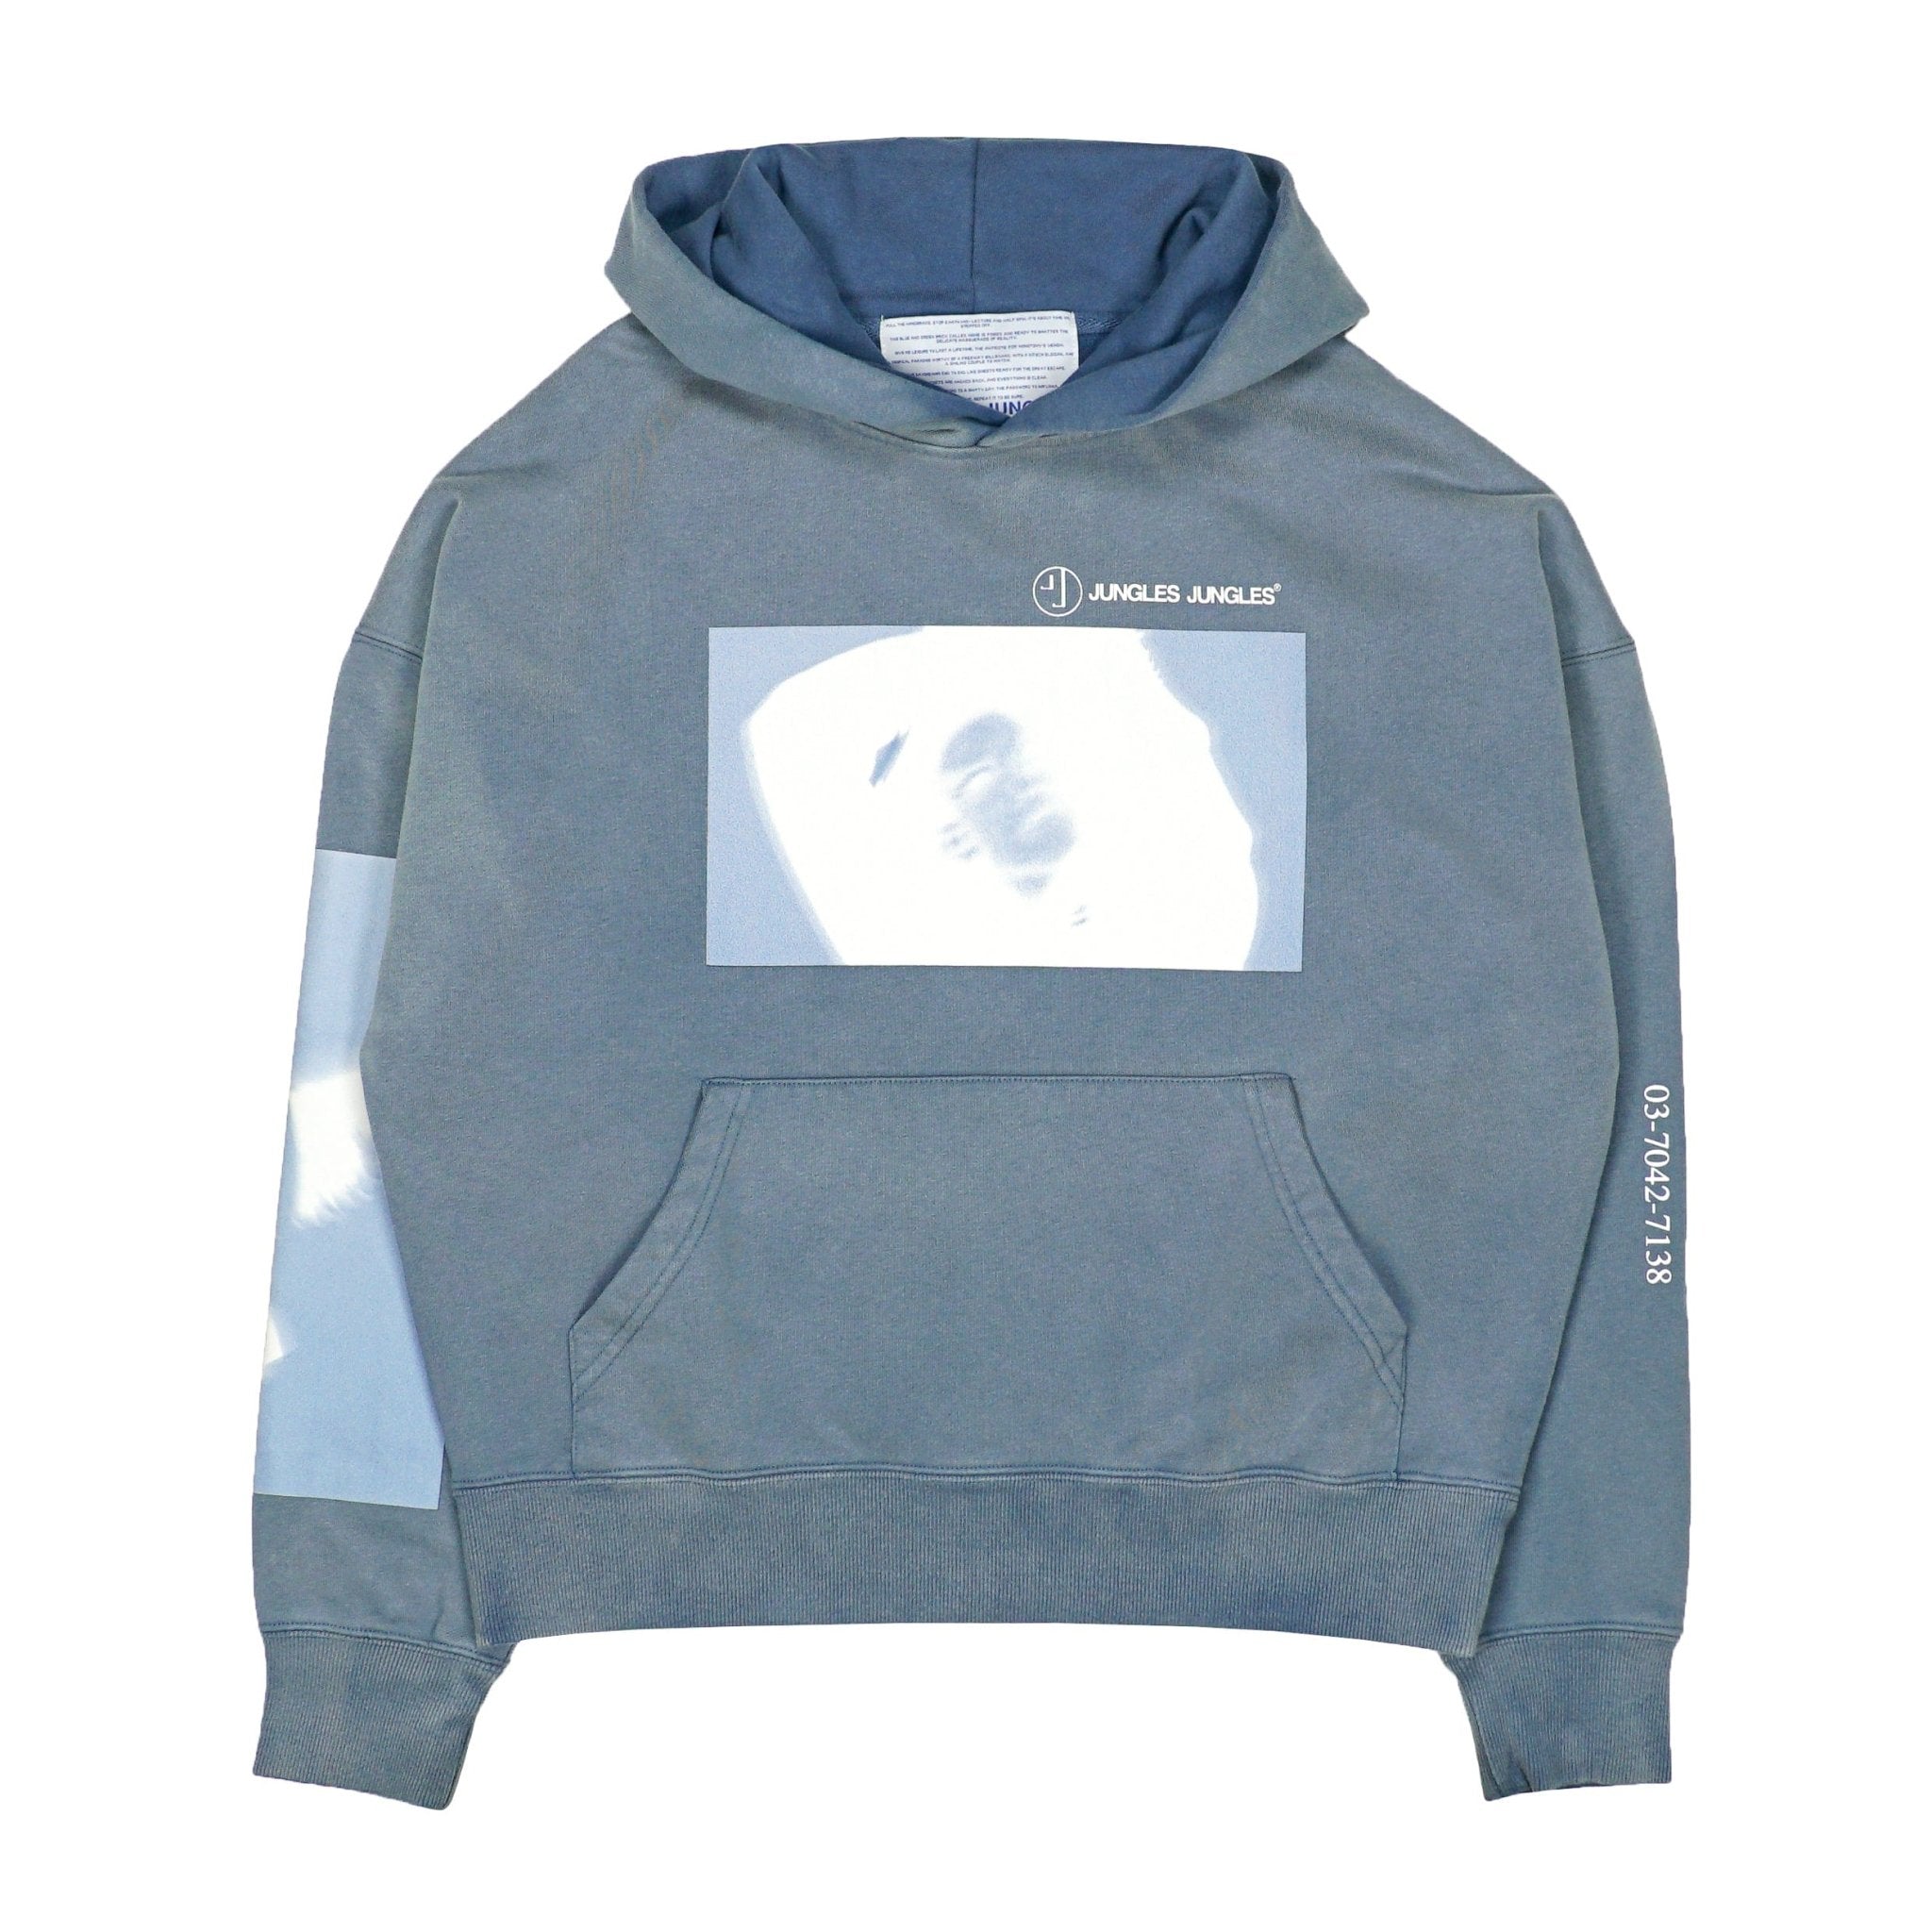 Movements Hoodie in spray fade blue